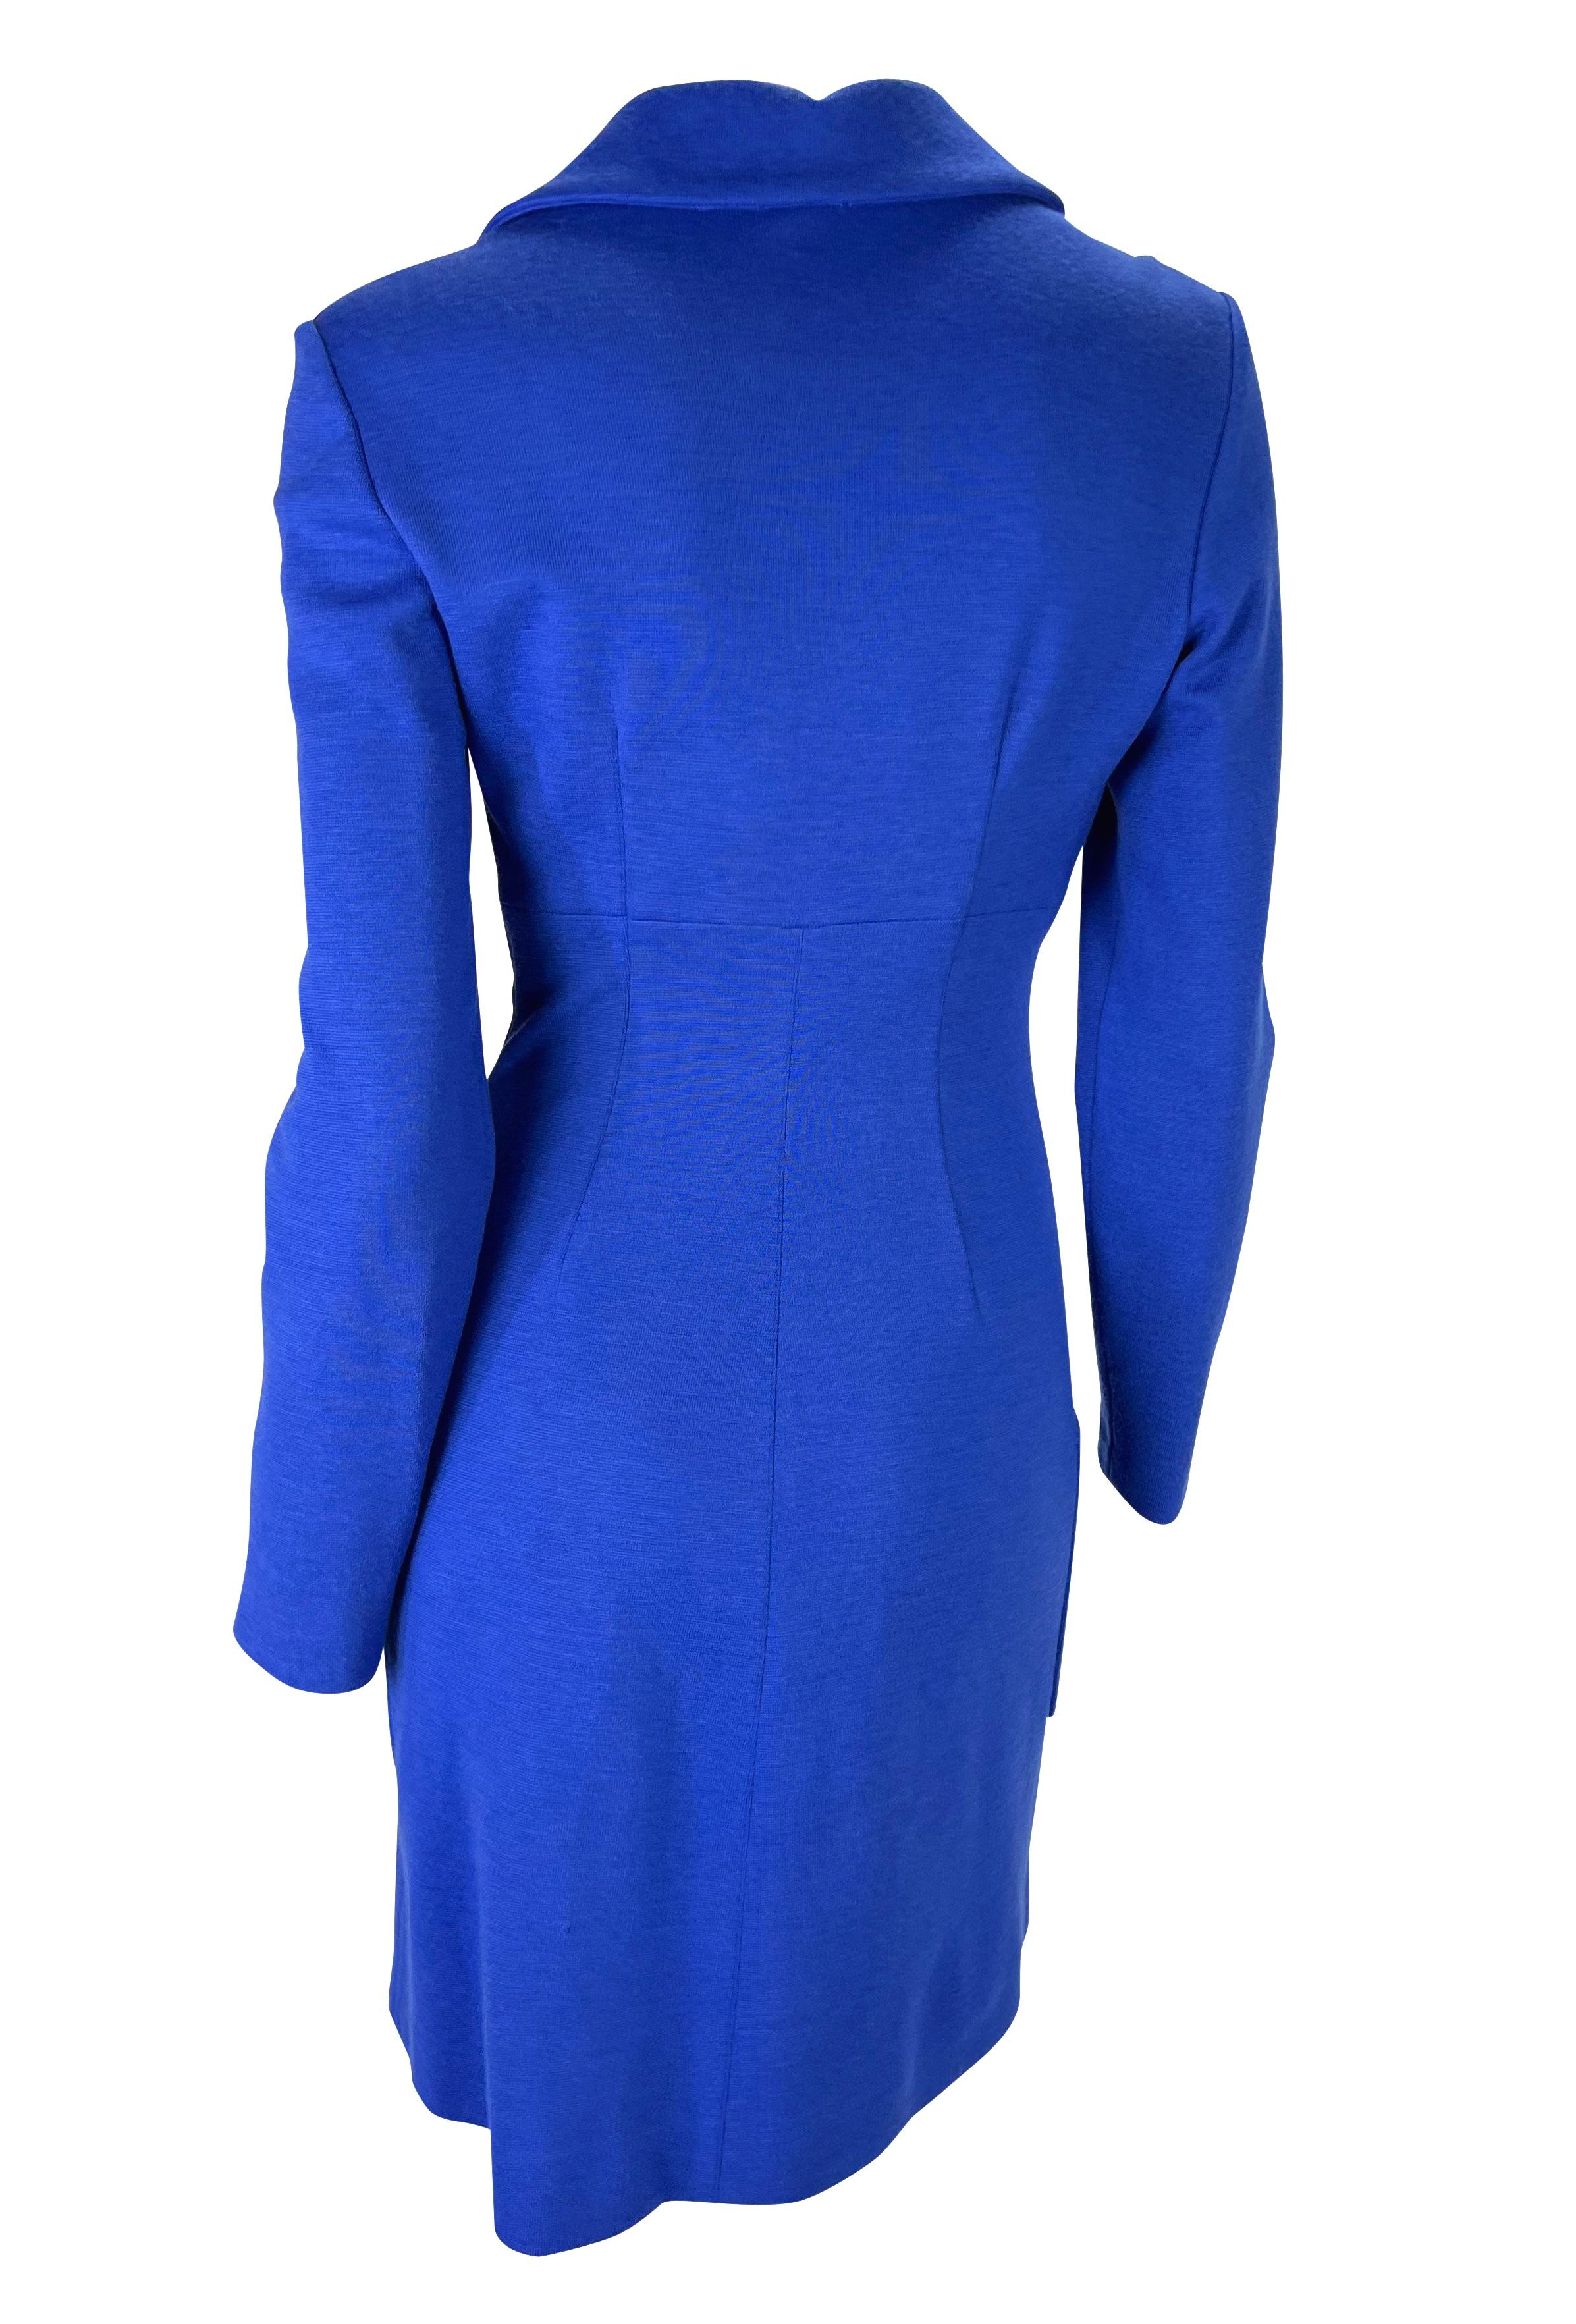 Women's F/W 1996 Gianni Versace Couture Royal Blue Wool Medusa Cinched Button Dress  For Sale